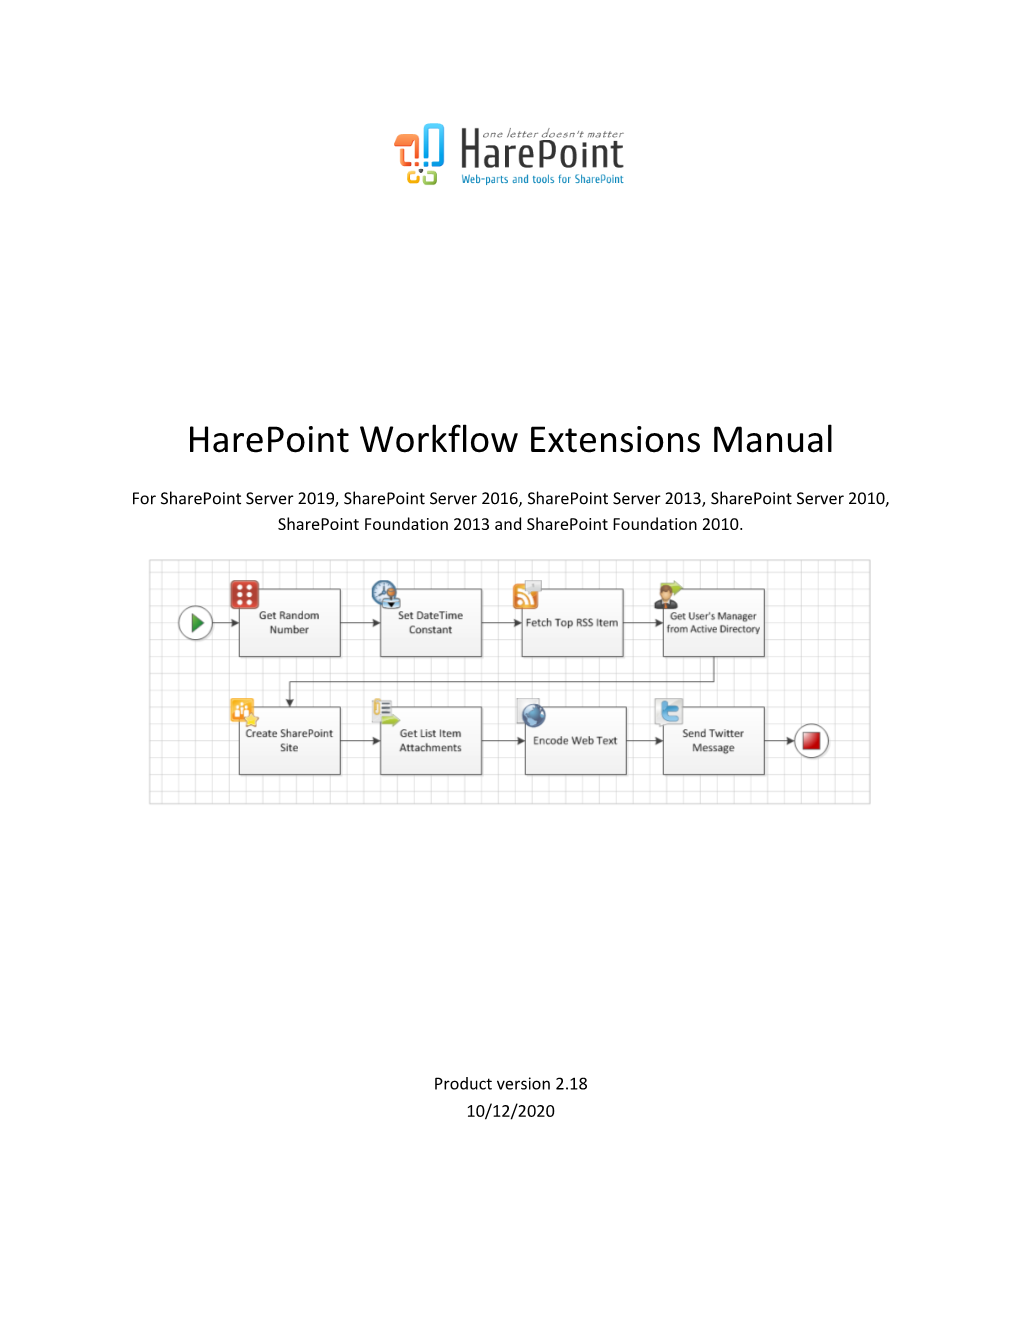 Harepoint Workflow Extensions Manual